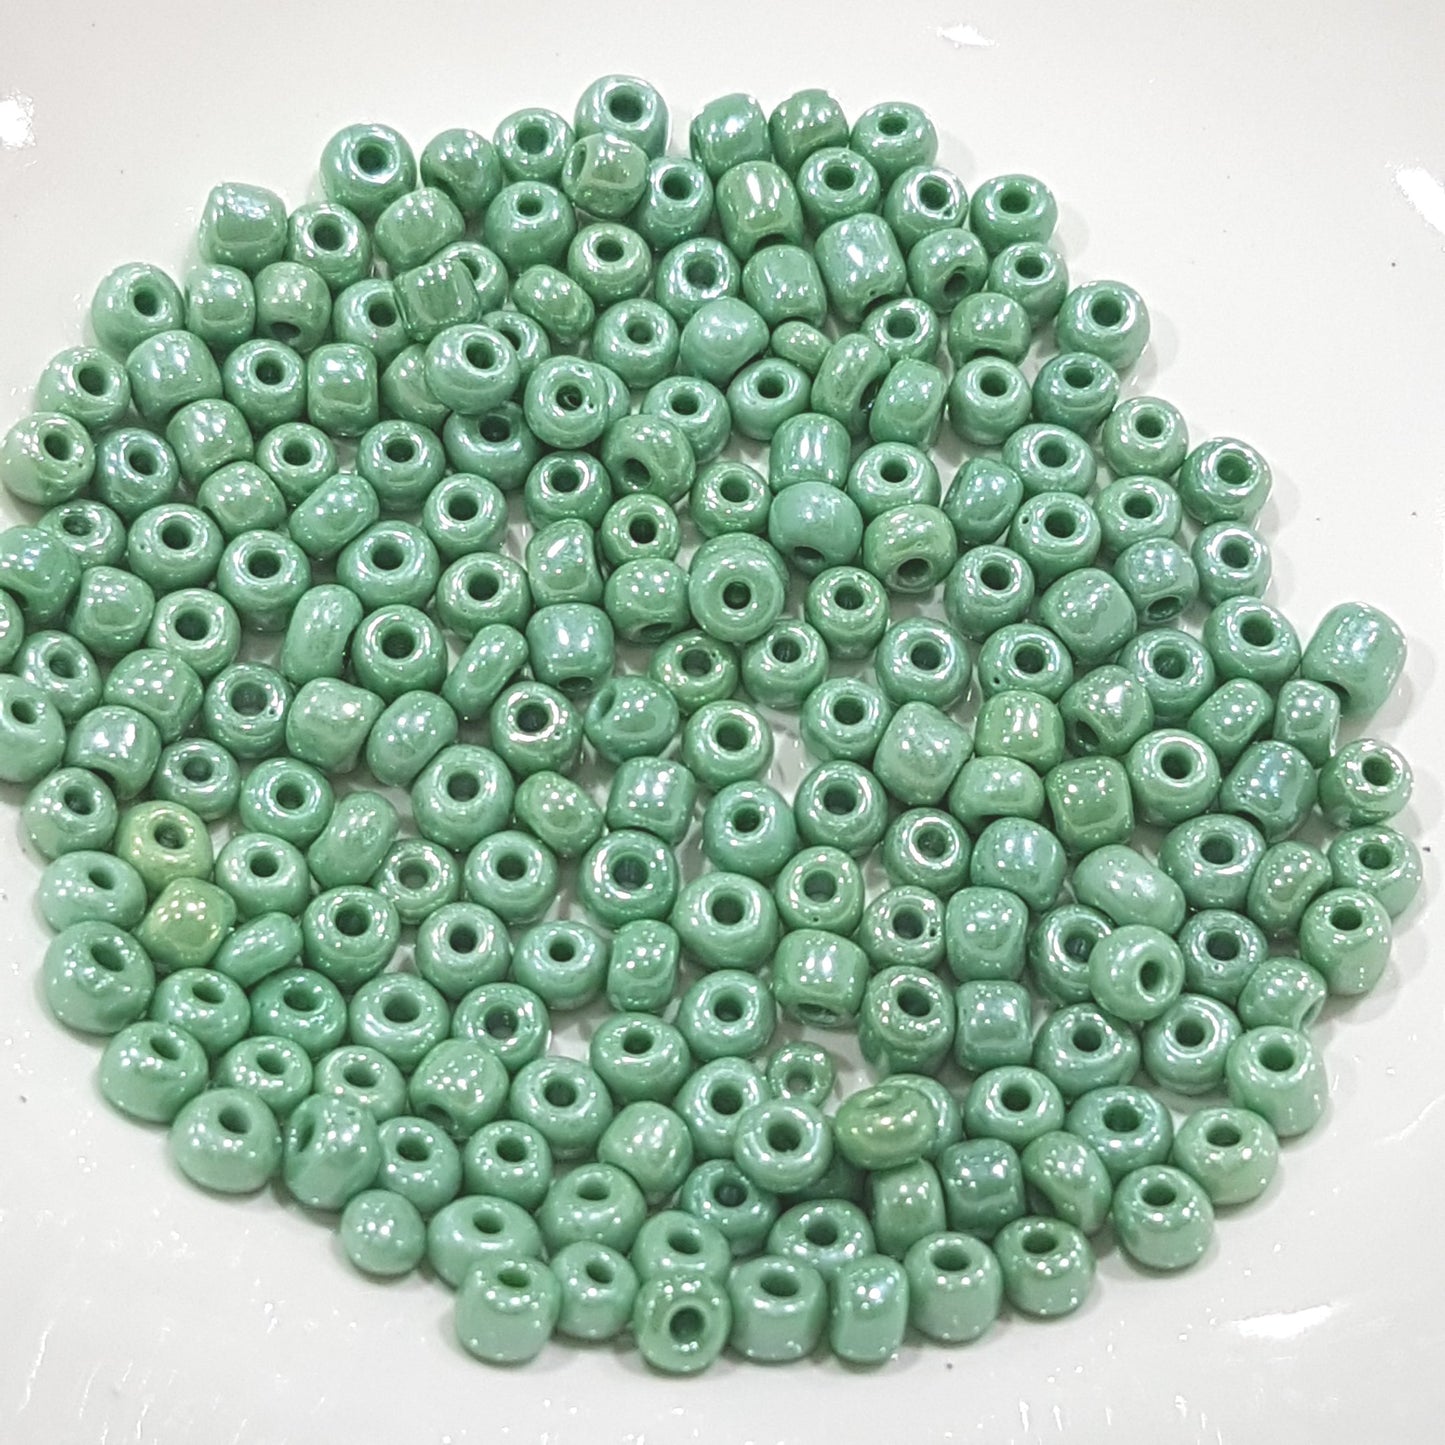 15g 3mm Pearl Green Seed Beads